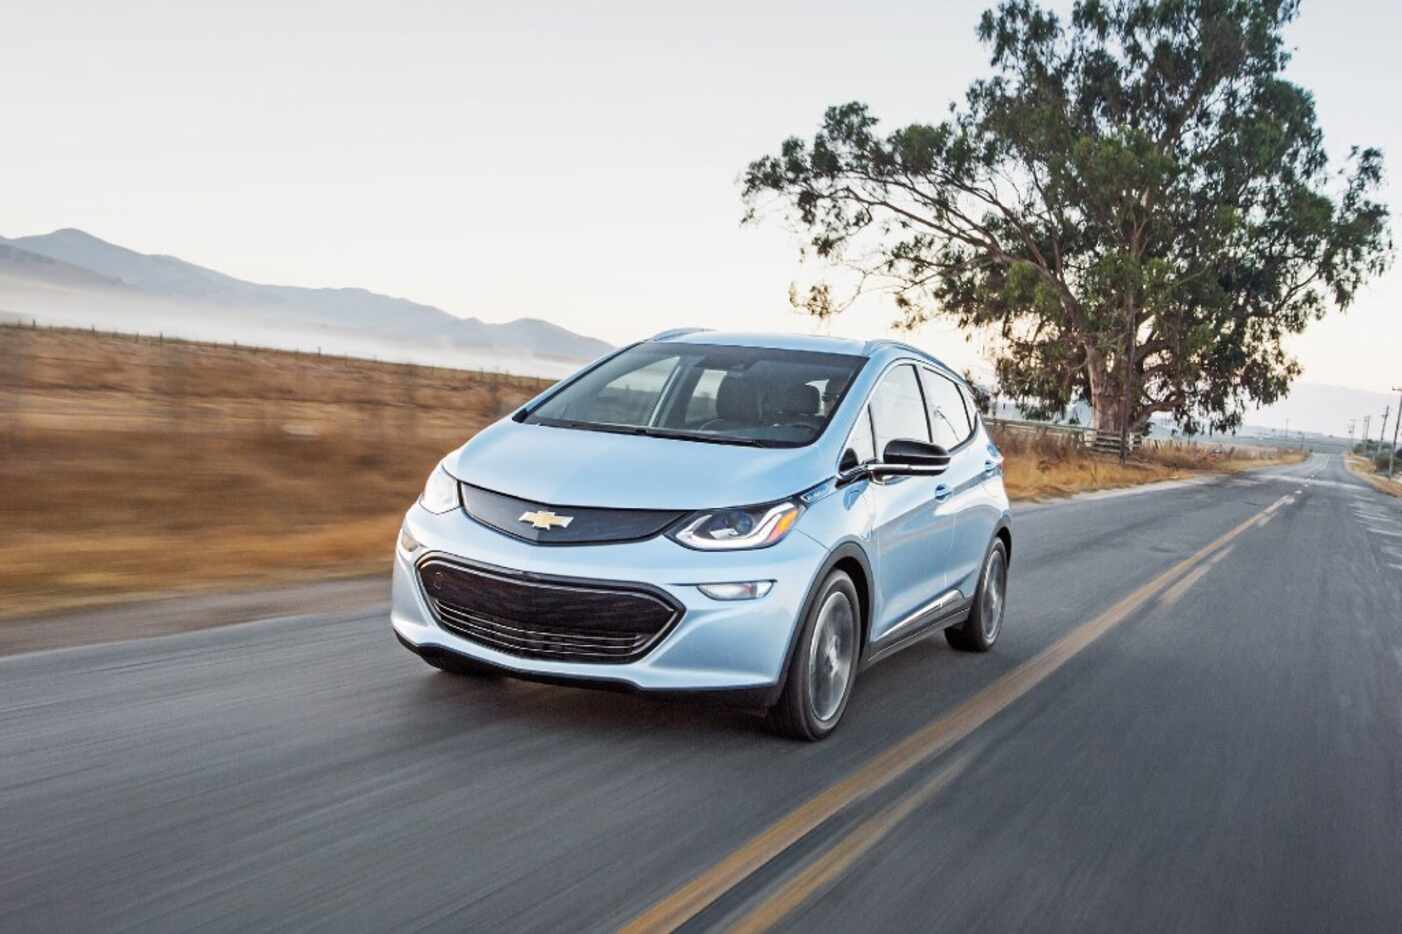 The 2017 Chevrolet Bolt EV goes from 0 to 60 mph in a respectable 6.5 seconds.